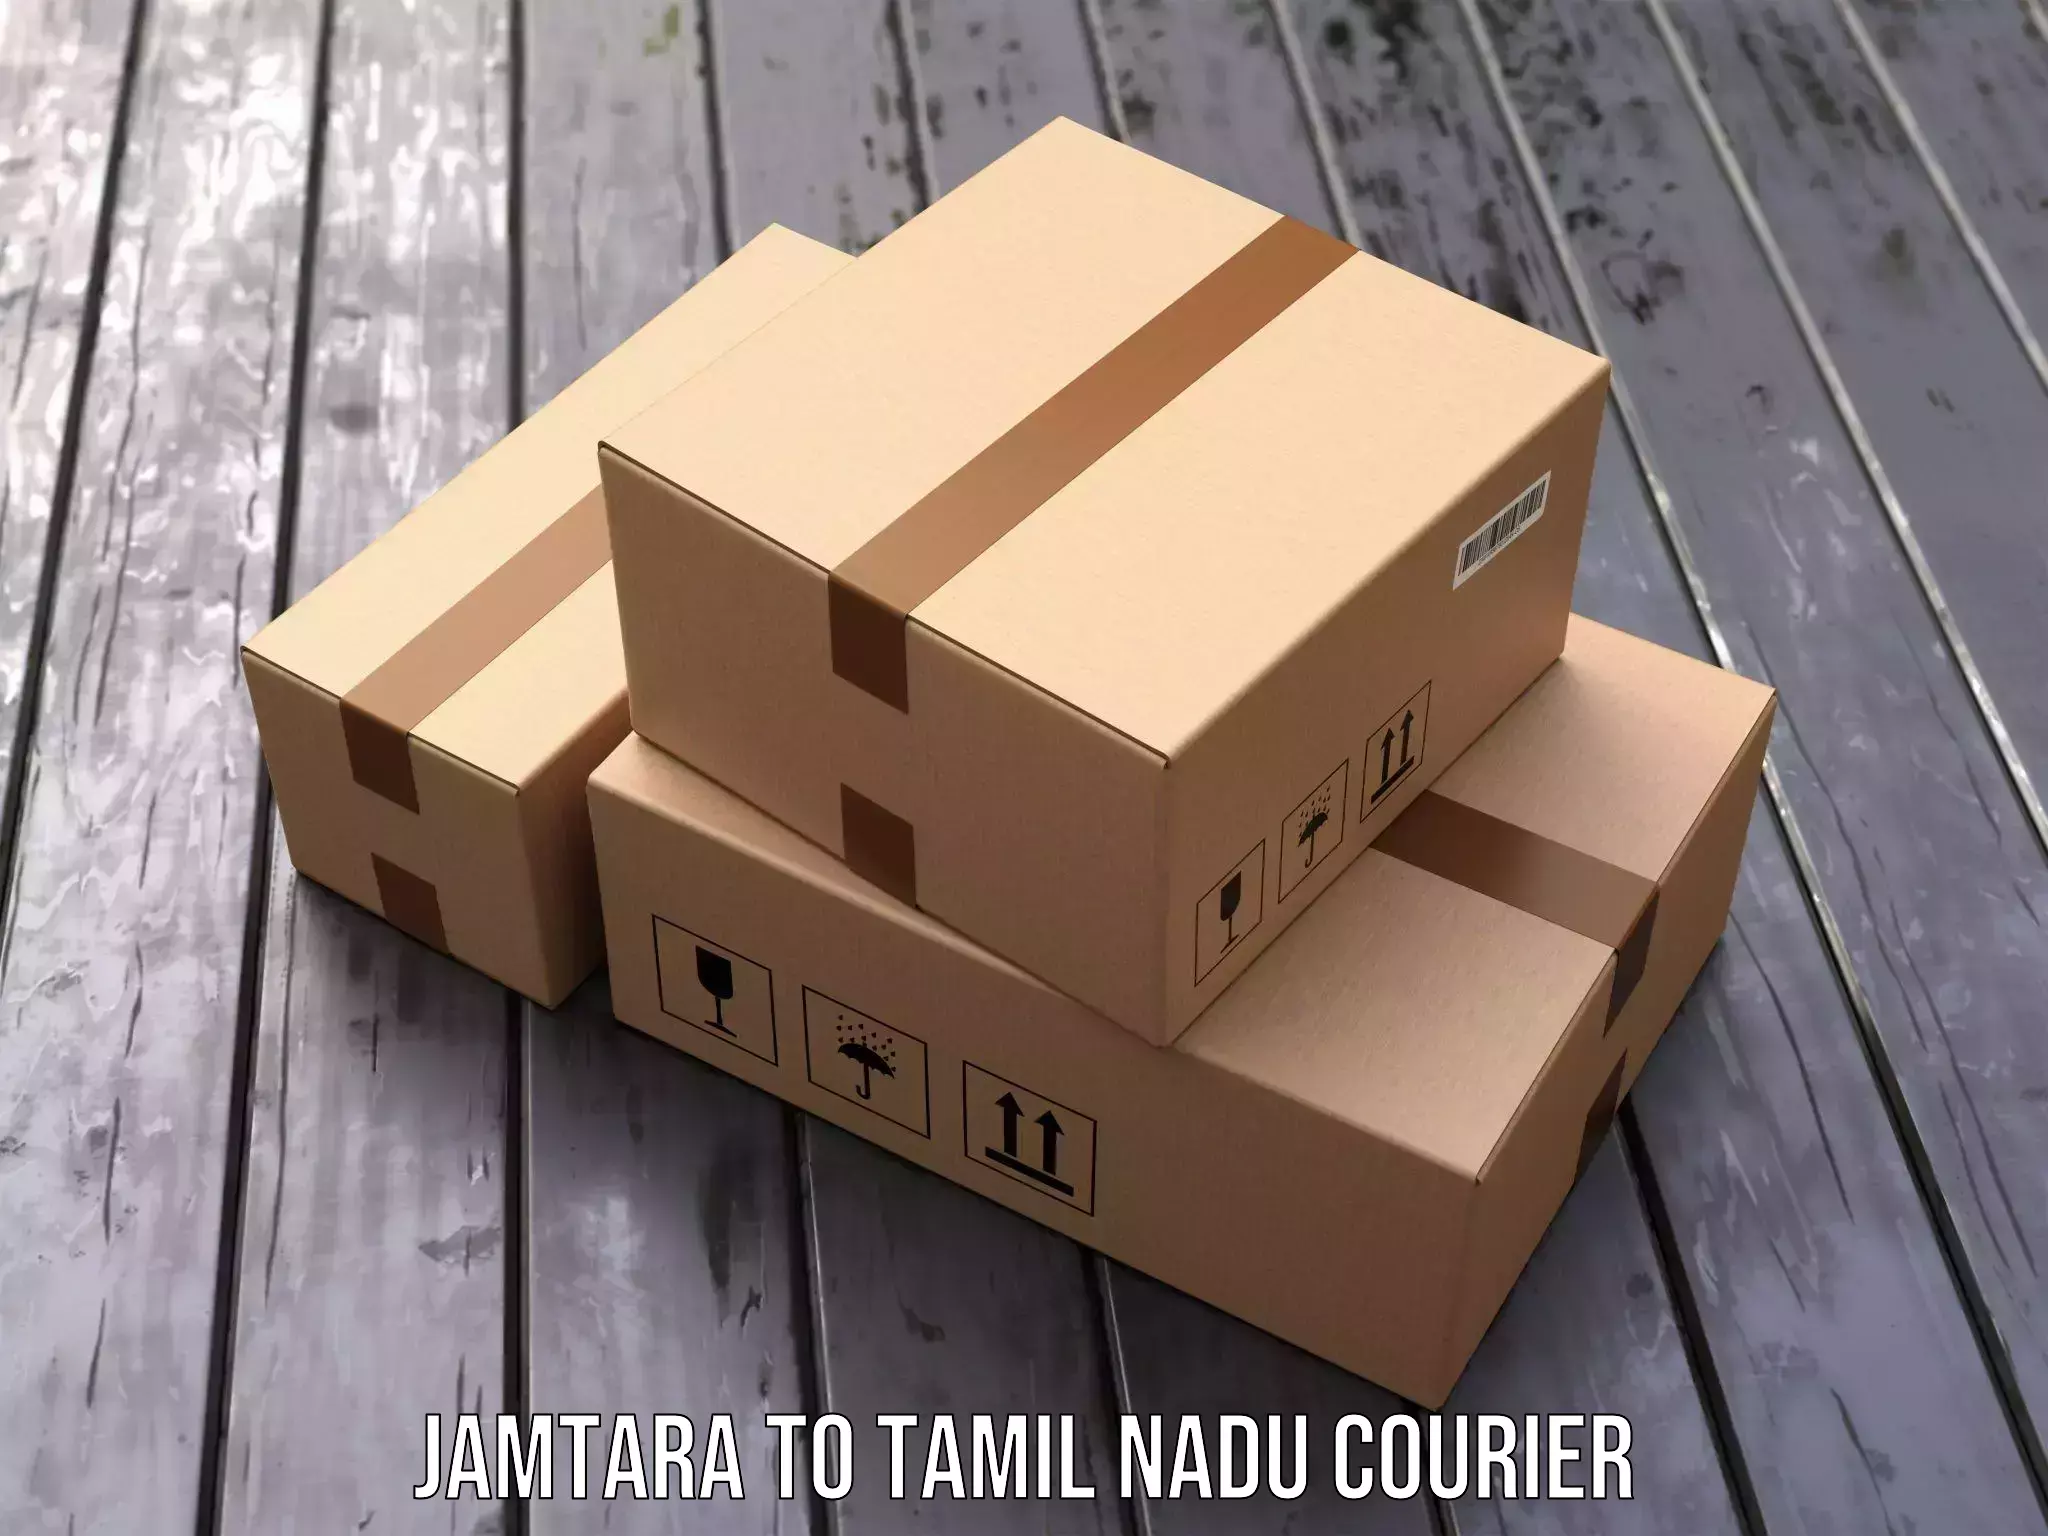 Cash on delivery service Jamtara to Coimbatore